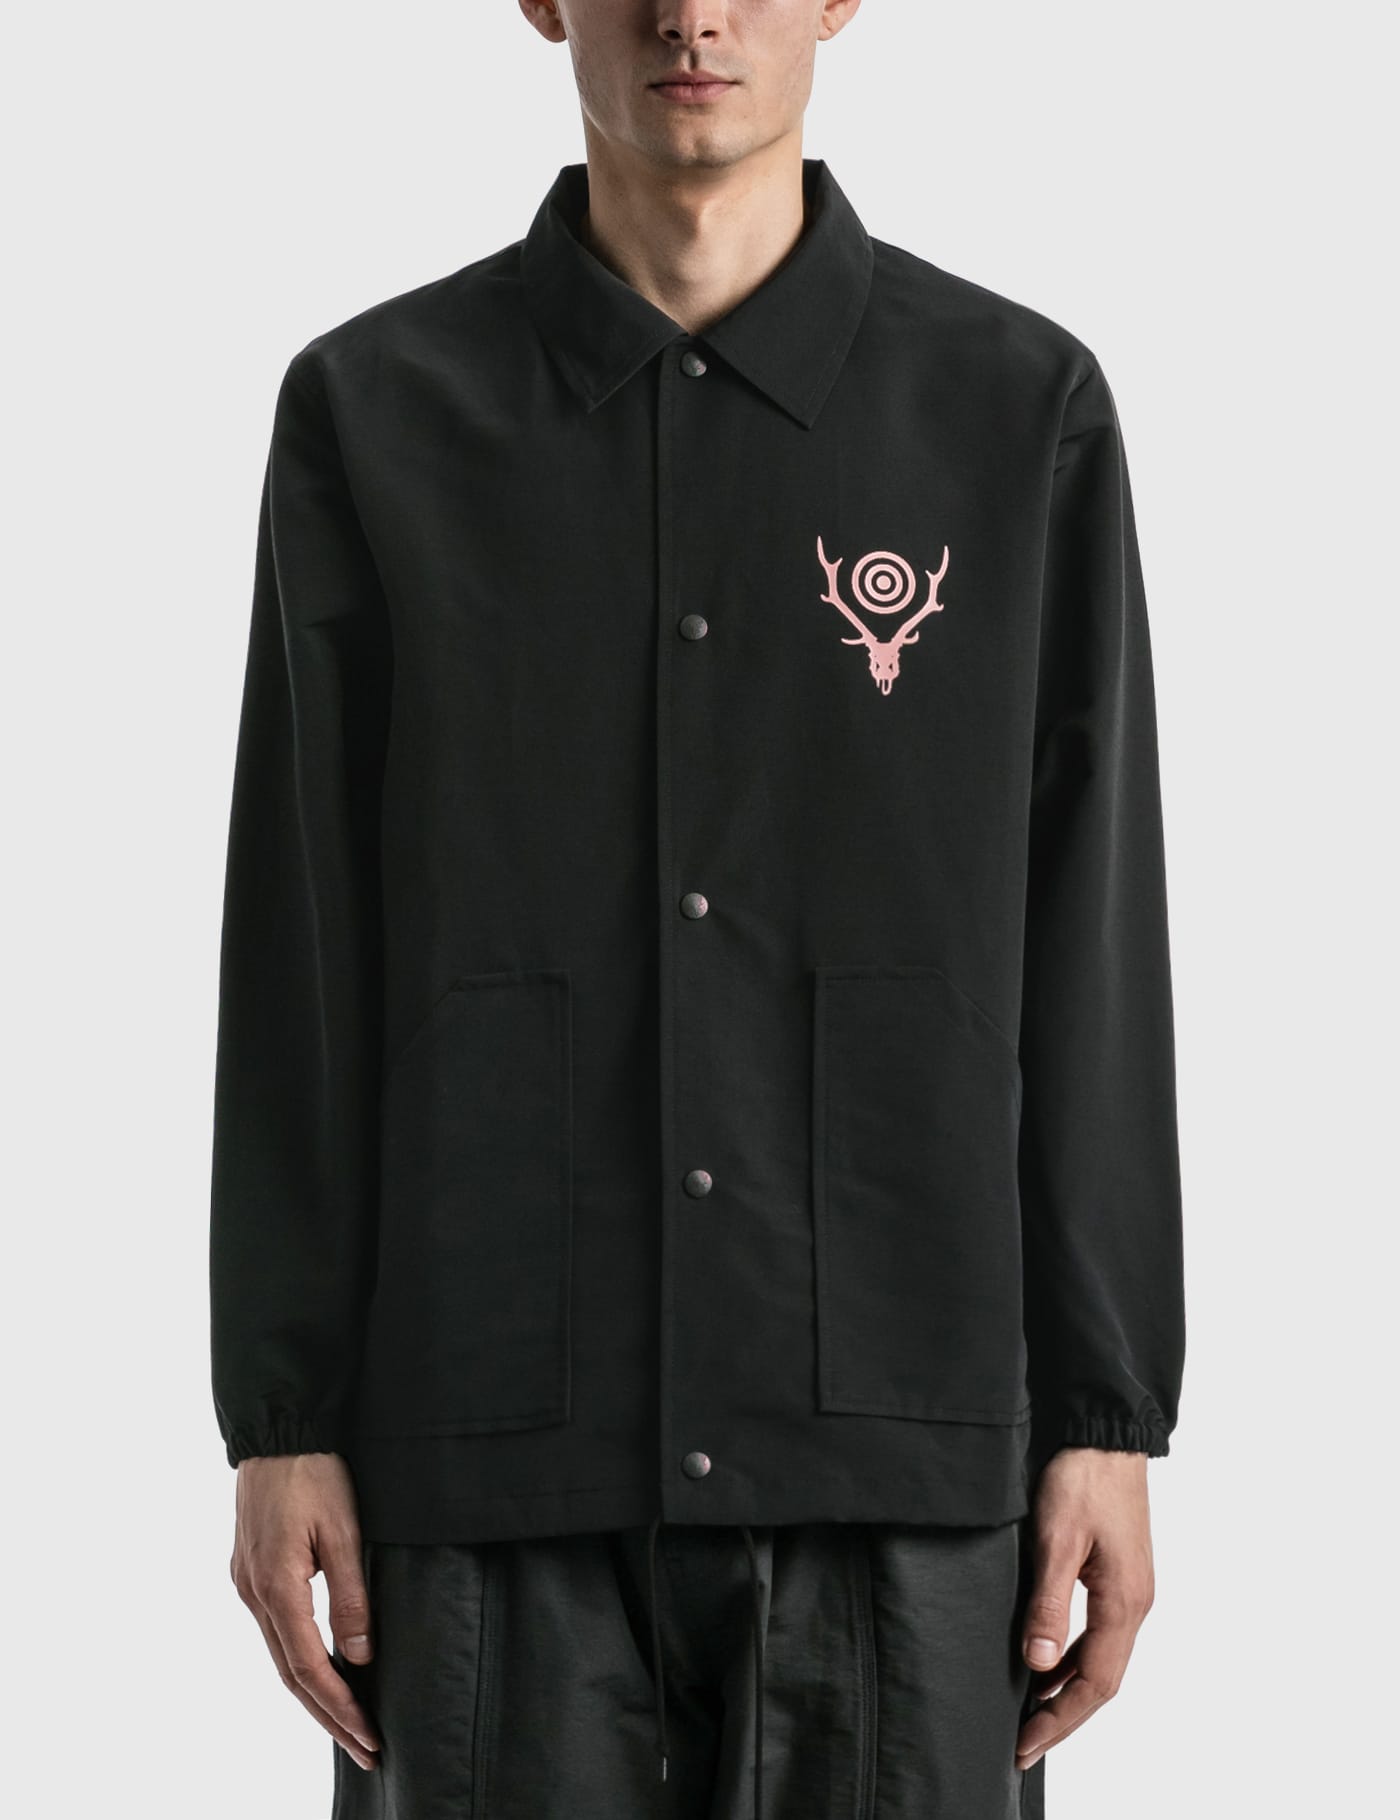 South2 West8 - Oxford Coach Jacket | HBX - Globally Curated